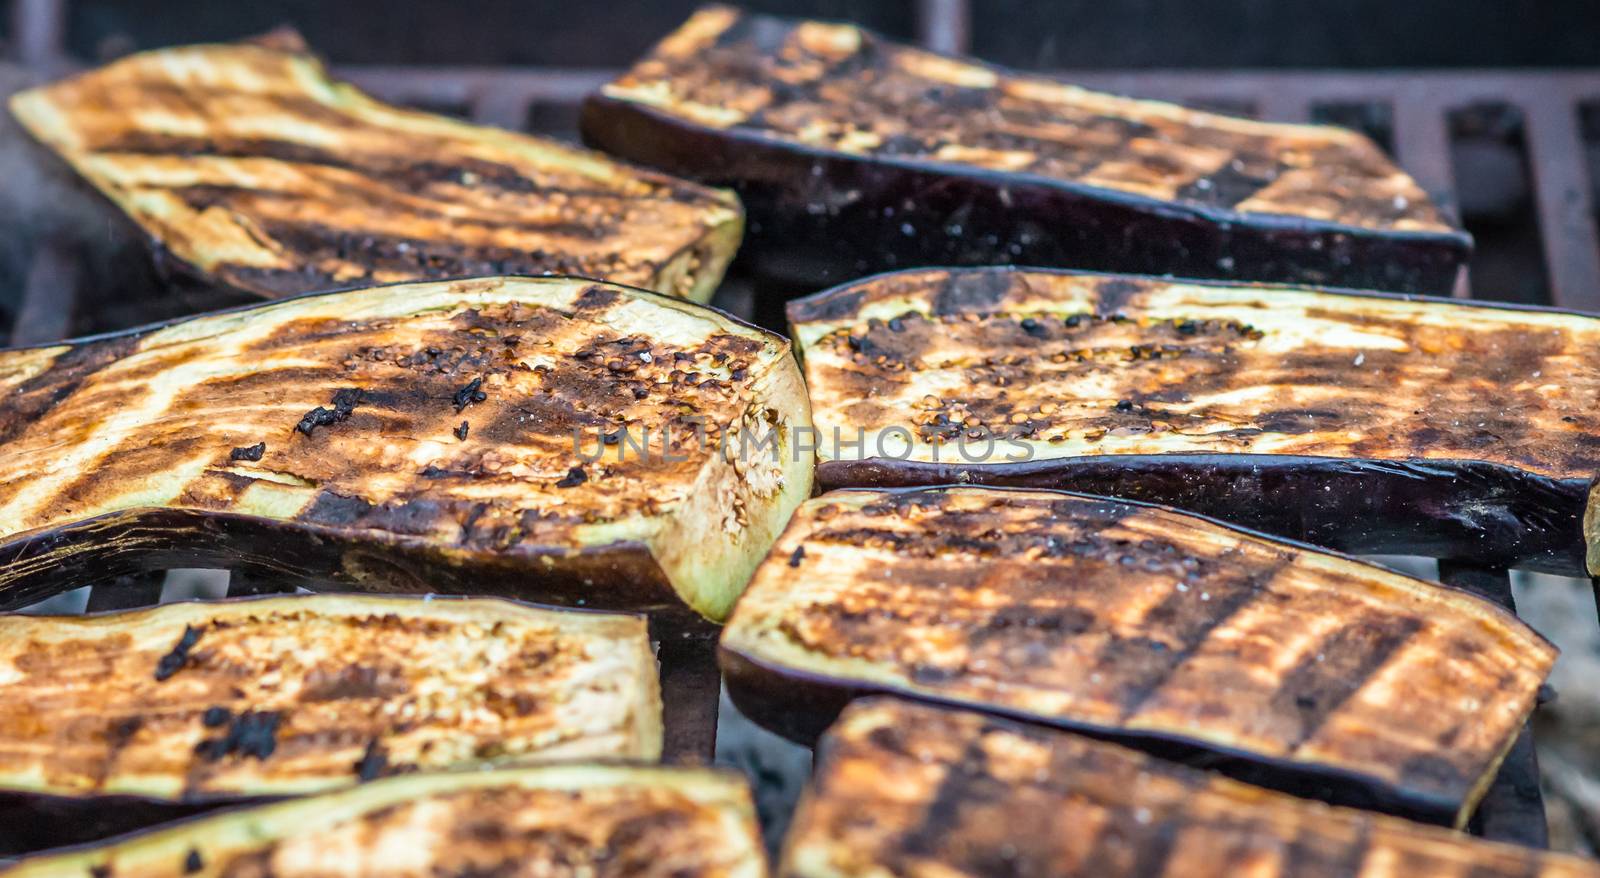 organic eggplant prepared on the grill. Grilled vegetables